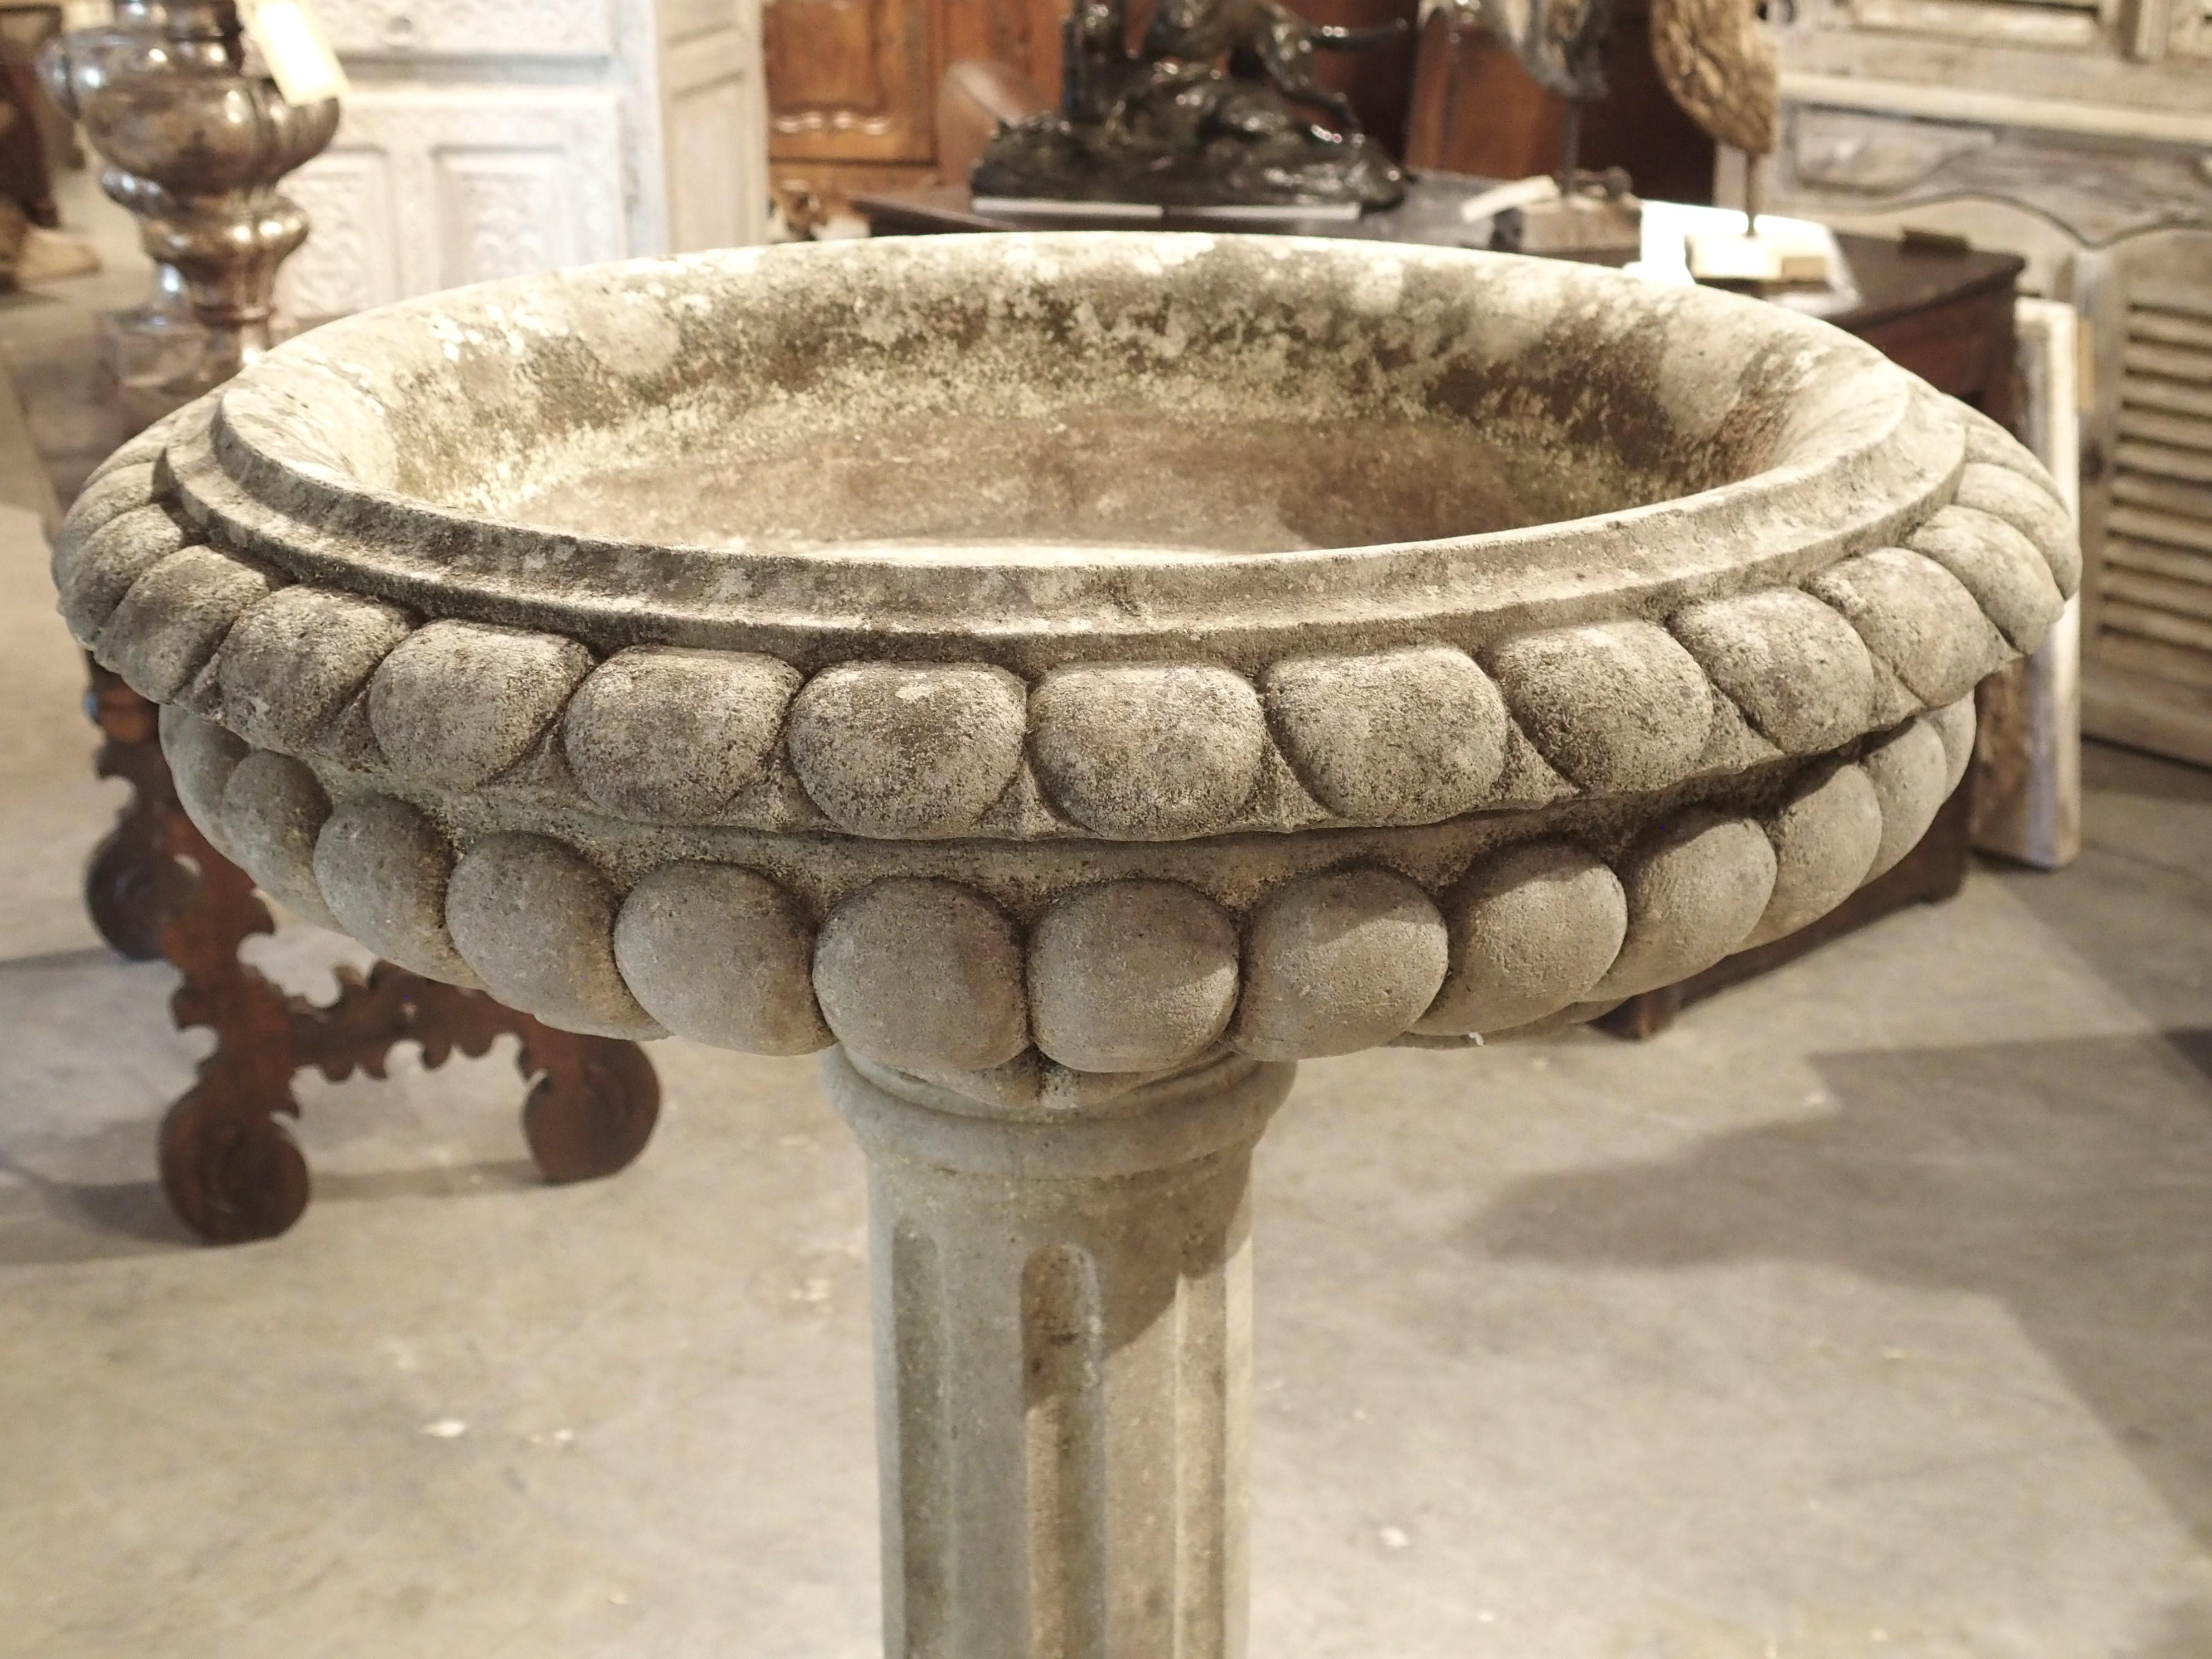 Standing over 45 inches tall, this well-carved limestone planter or fountain element would have a commanding presence in any landscape installation. Hand-carved in Italy in two sections (the basin is separate from the column/plinth section), a